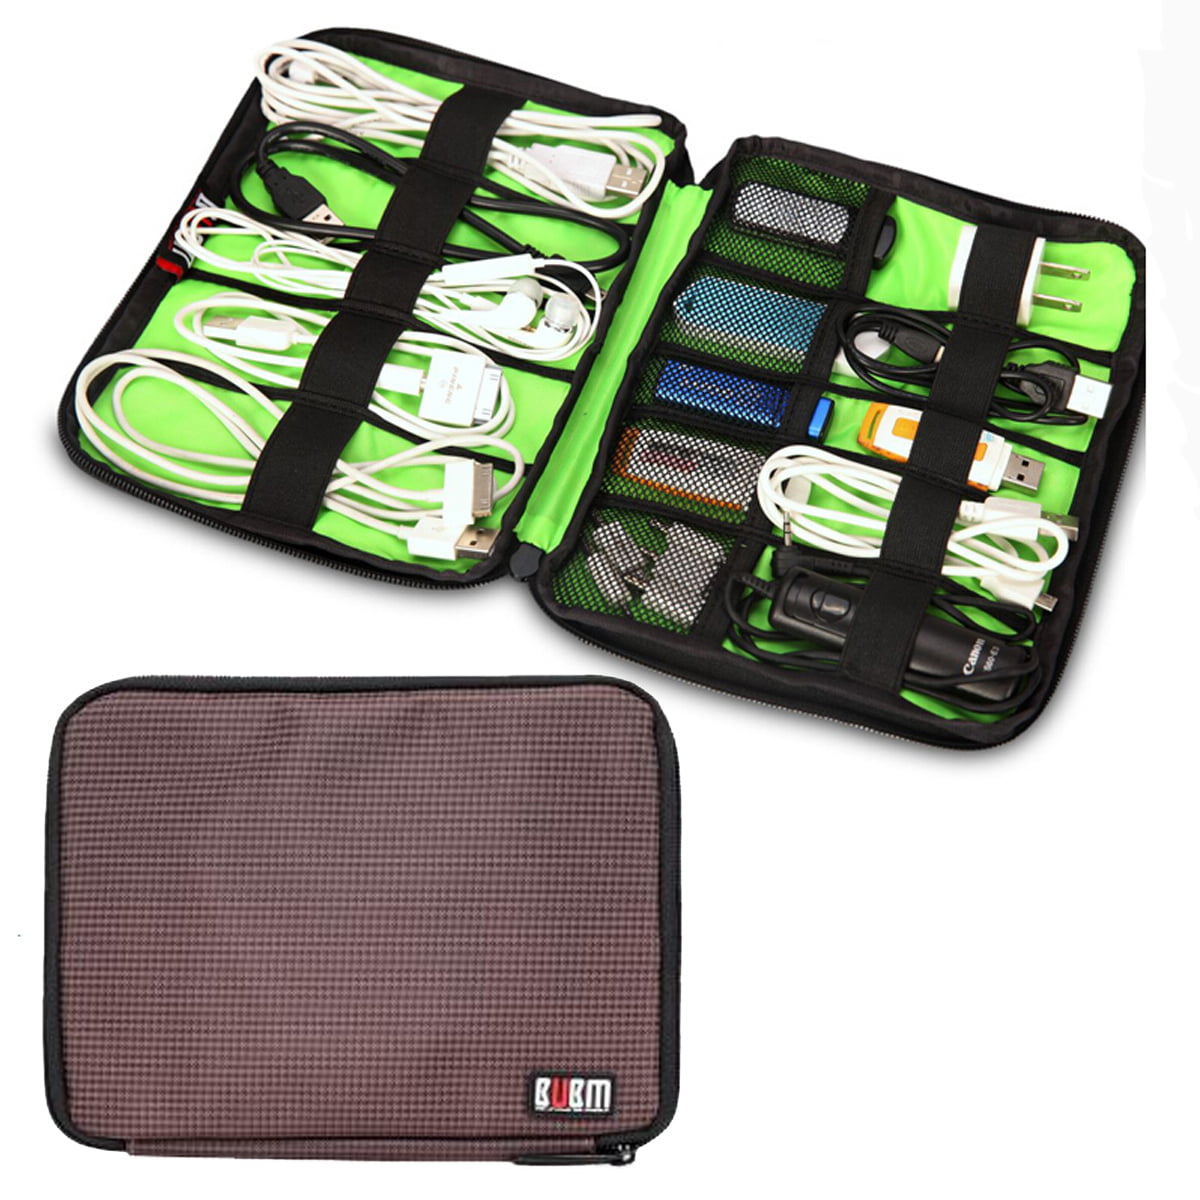 Portable Travel Electronic Accessories USB Drive Organizer Bag Insert Case N3 